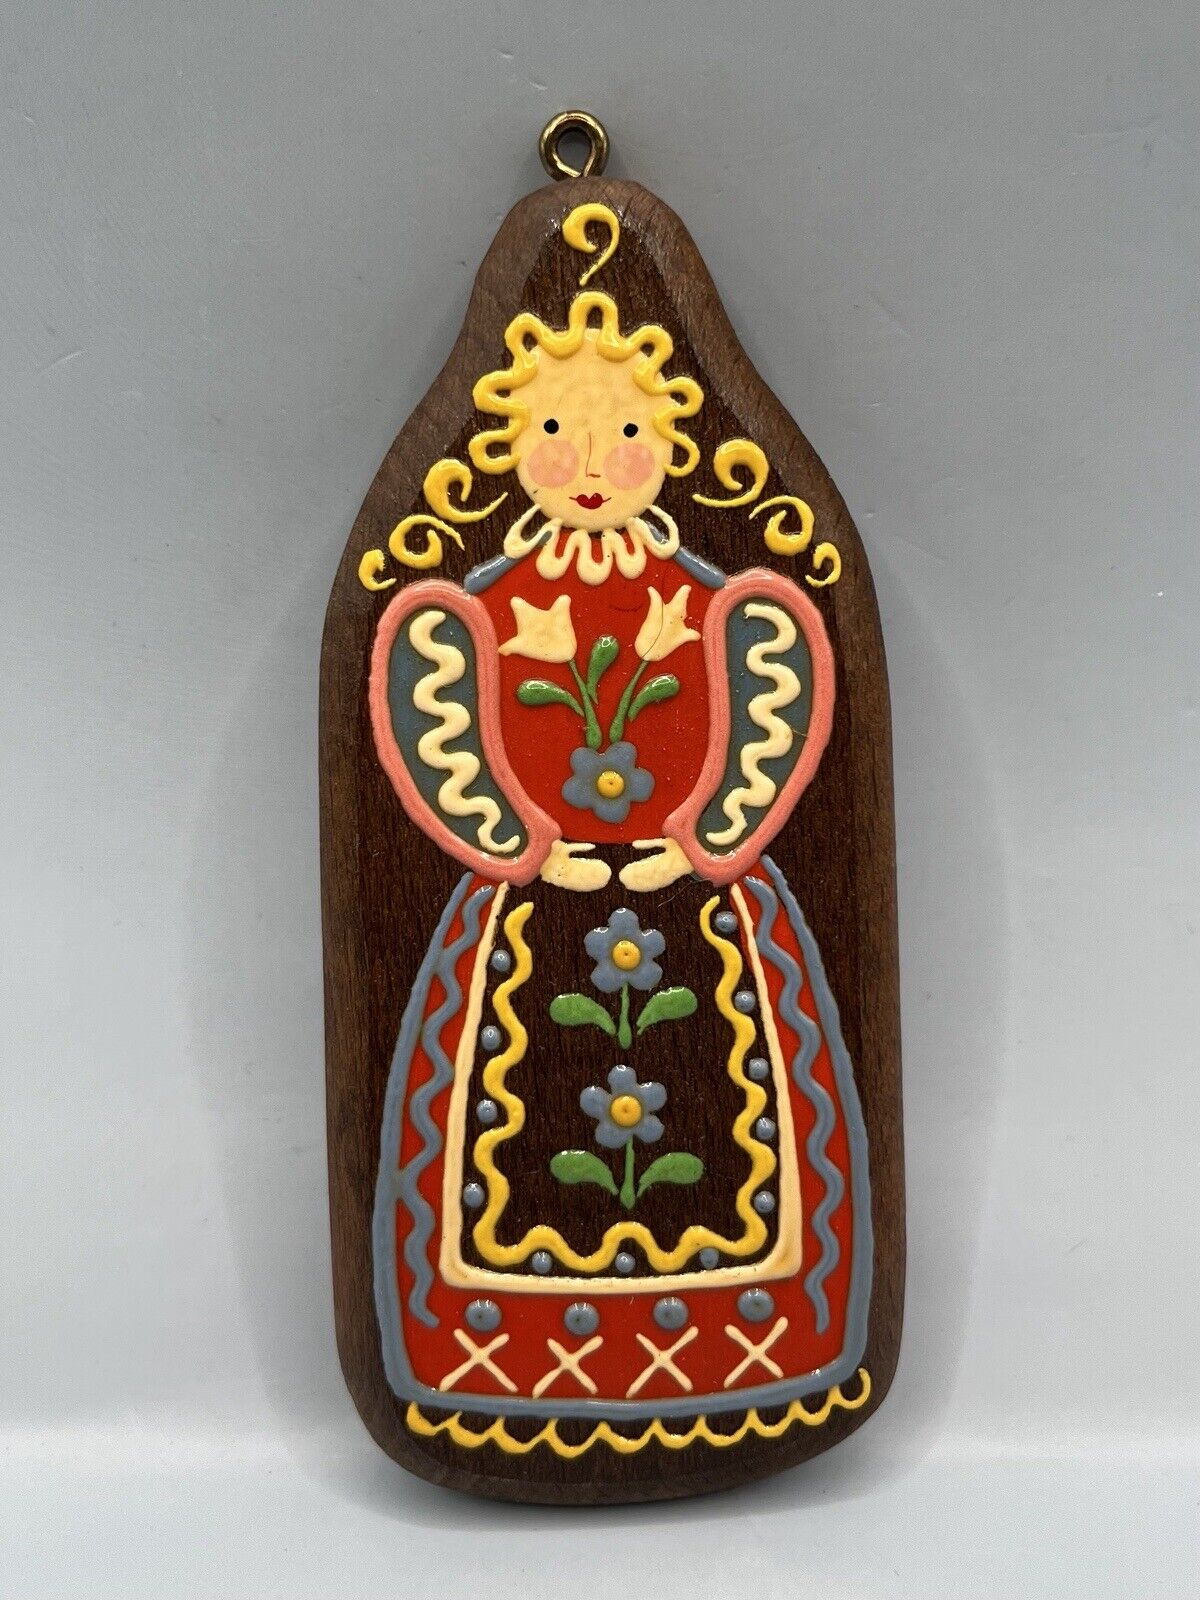 Wooden Handpainted In Austria Ornament Of Lady Sold At Neiman Marcus